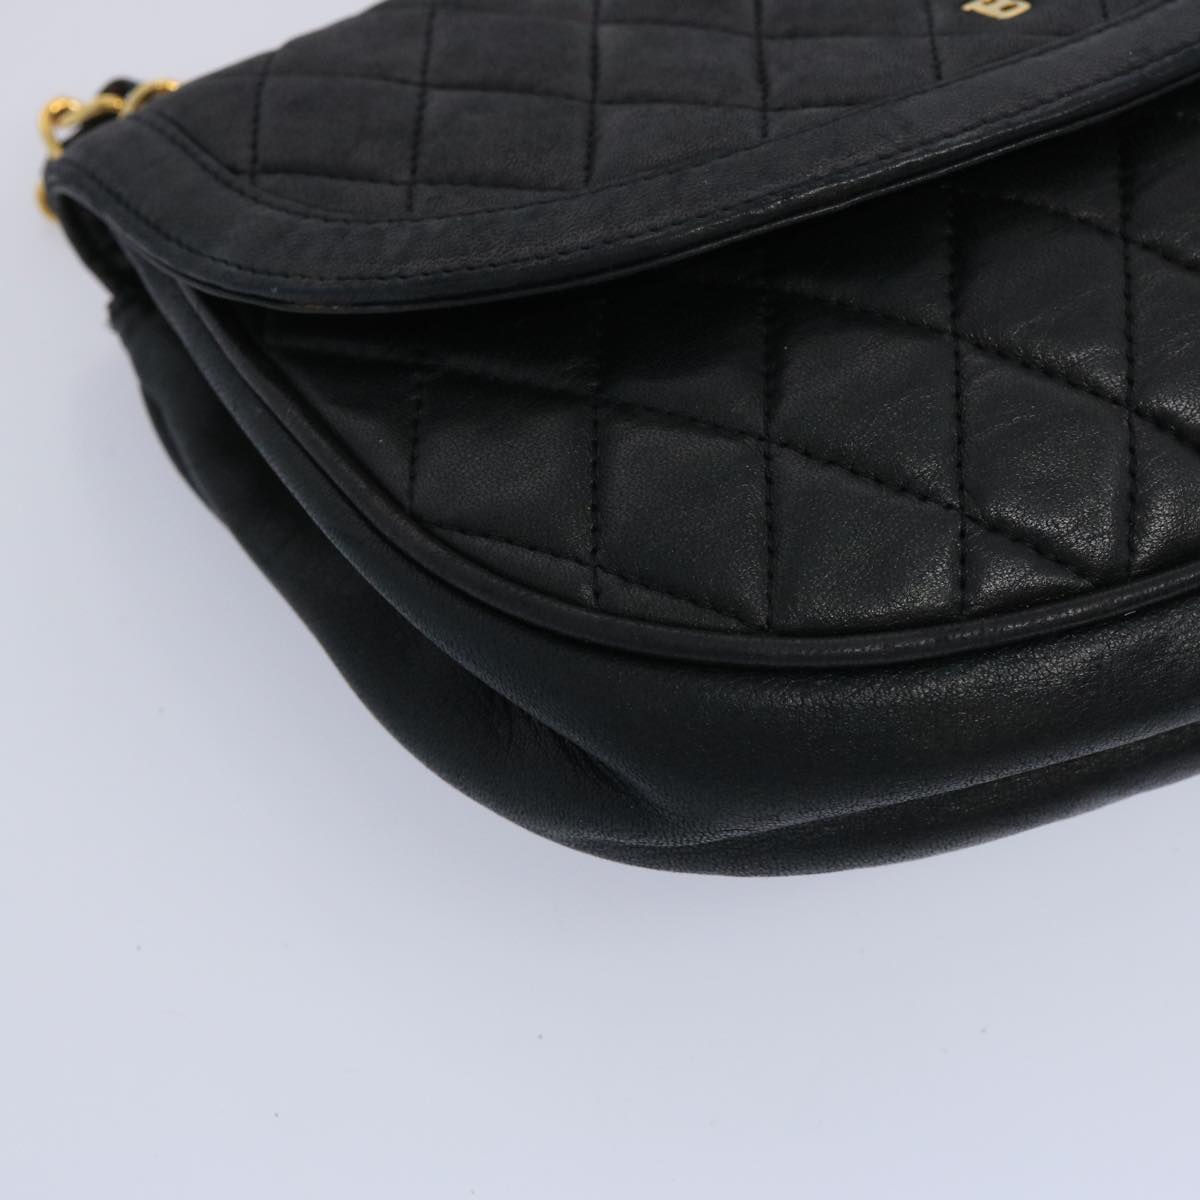 BALLY Quilted Shoulder Bag Leather Navy Auth bs11762